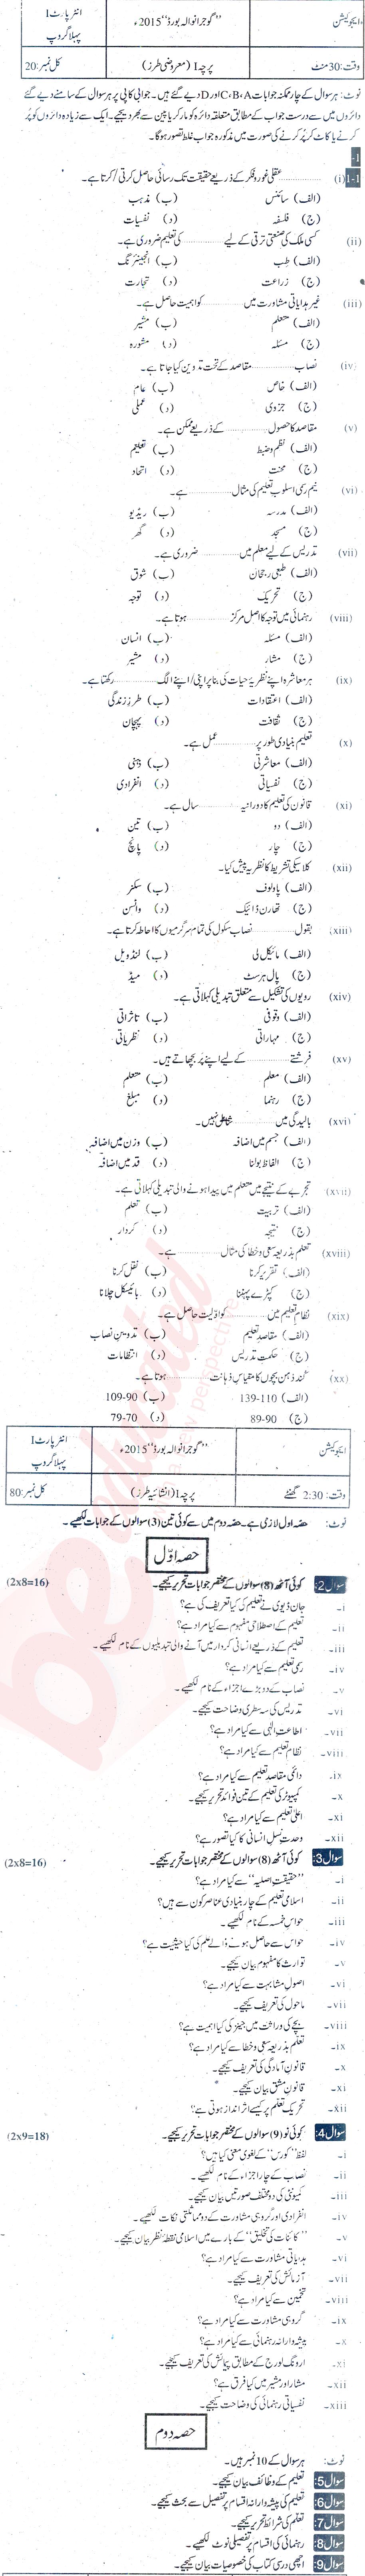 Education FA Part 1 Past Paper Group 1 BISE Gujranwala 2015